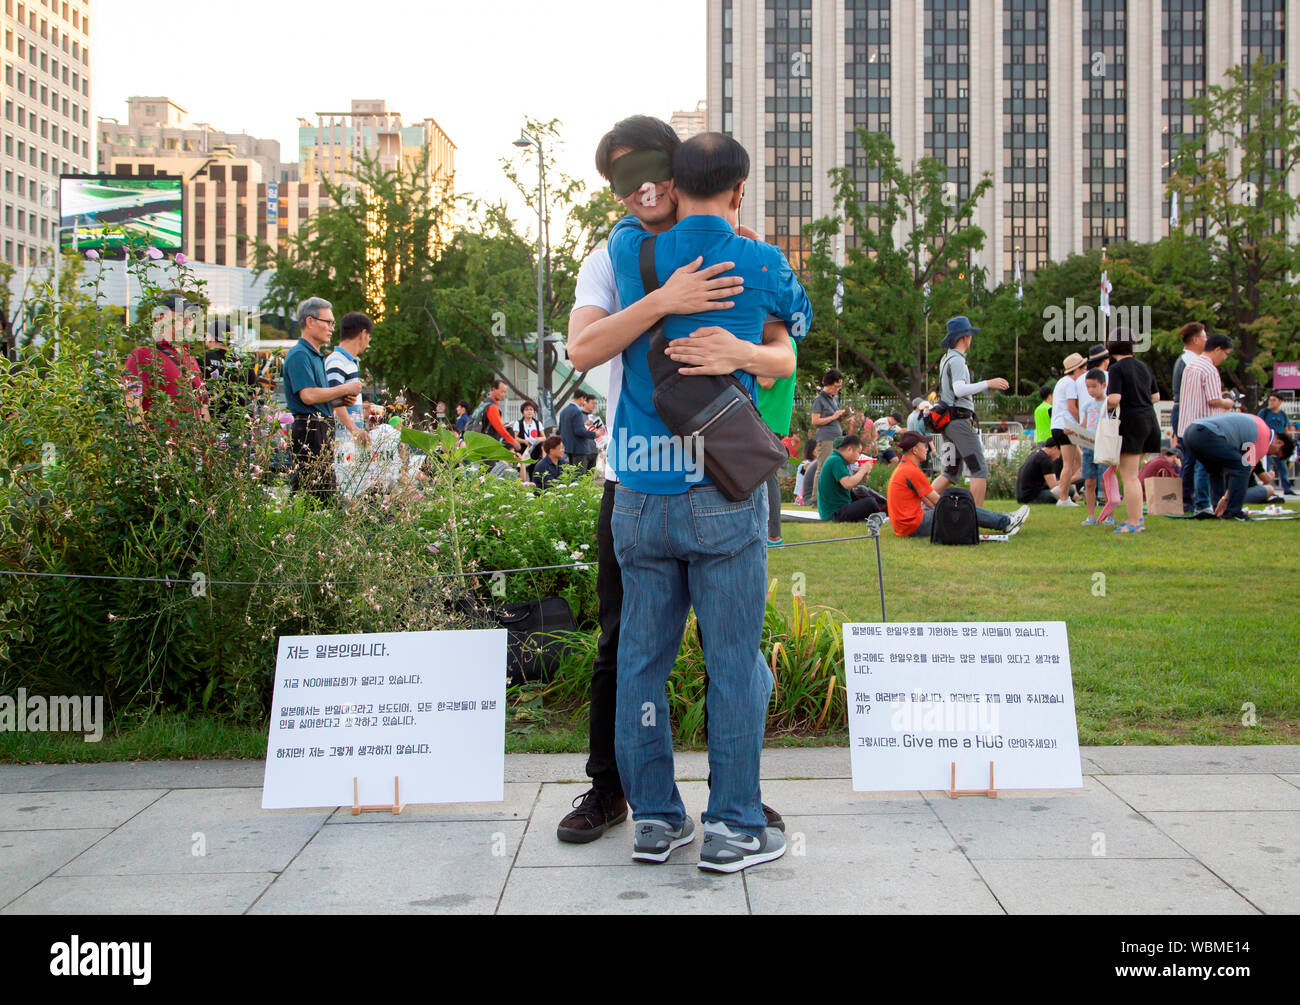 Koichi Kuwabara, August 24, 2019 : Japanese Koichi Kuwabara (back) gives a free hug to a South Korean man during a Free Hugs campaign in his hopes of friendly relations between Japanese people and South Korean people at Gwanghwamun Square, a venue where a rally to denounce Japanese Prime Minister Shinzo Abe and his regime was being held in Seoul, South Korea. Hundreds of people attended the rally. South Korea's General Security of Military Information Agreement (GSOMIA) with Japan is set to expire on November 23, 2019 as Seoul decided on August 23 not to extend GSOMIA amid a trade spat with Ja Stock Photo